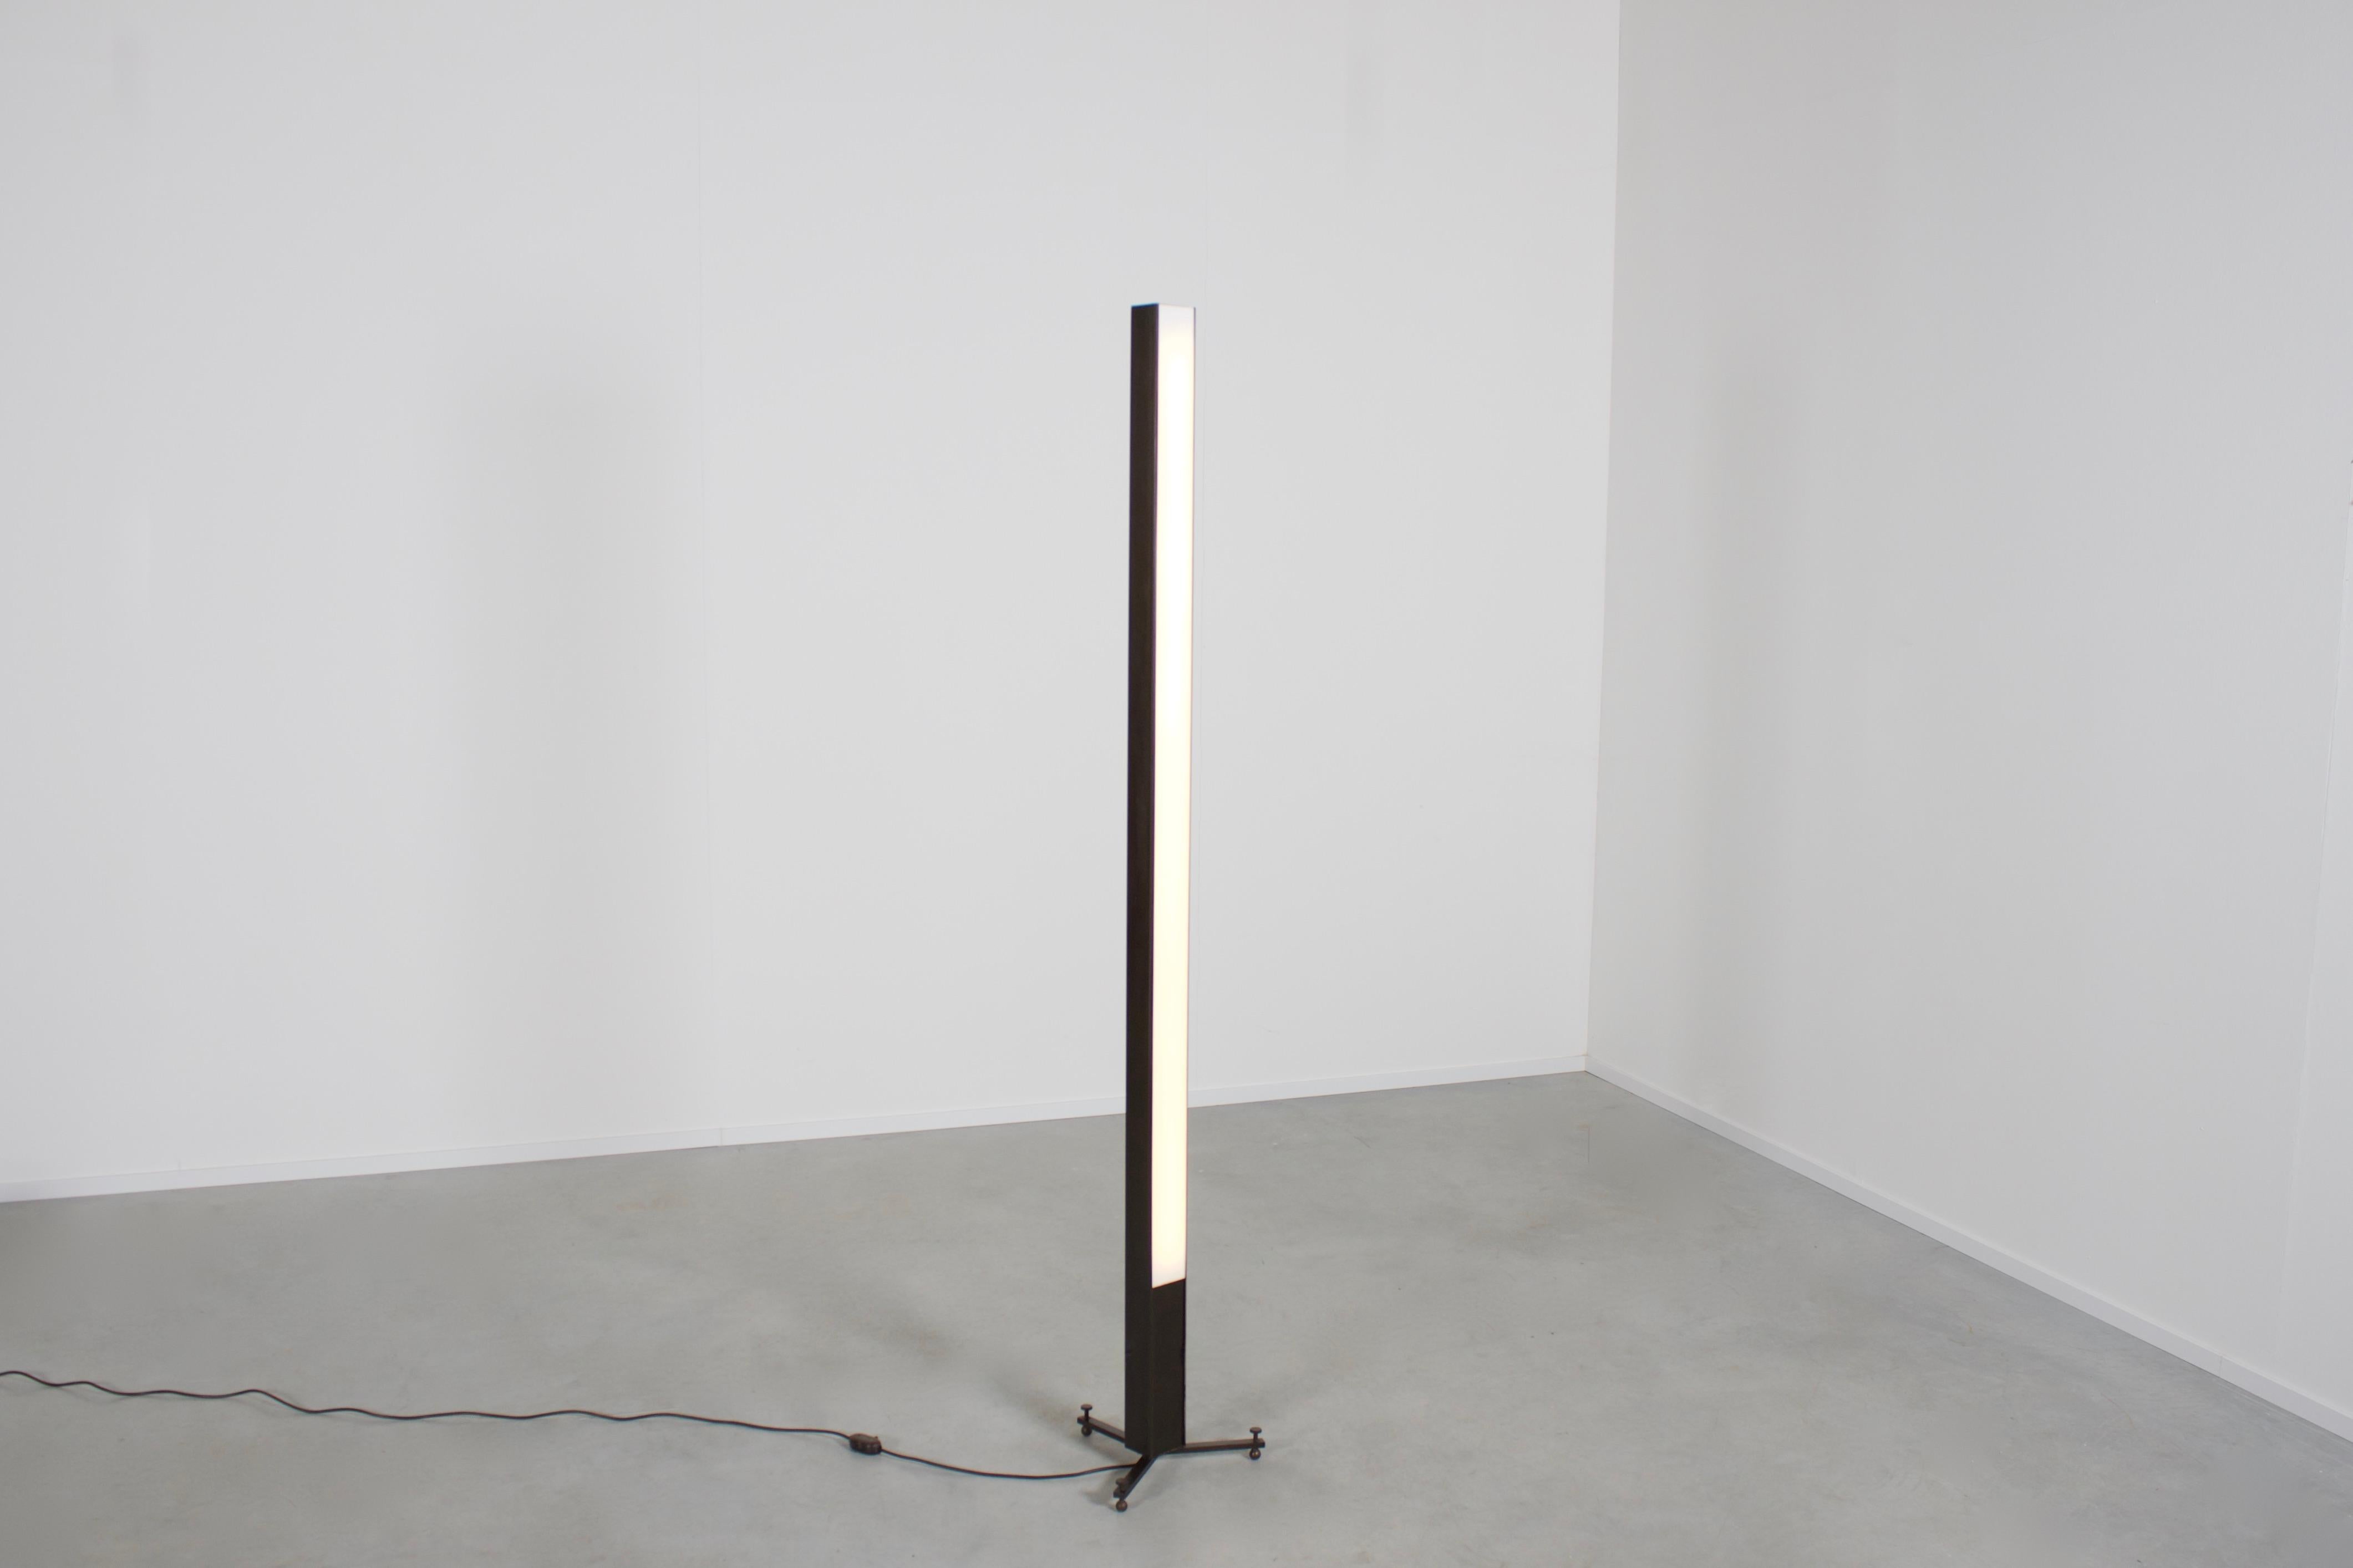 Very rare Minimalist floor lamp by Willem Iepma in very good original condition.

Manufactured by A. Polak in 1954

A. Polak manufactured these lamps in two heights, this is the largest version.

The lamp is made of patinated metal with a white